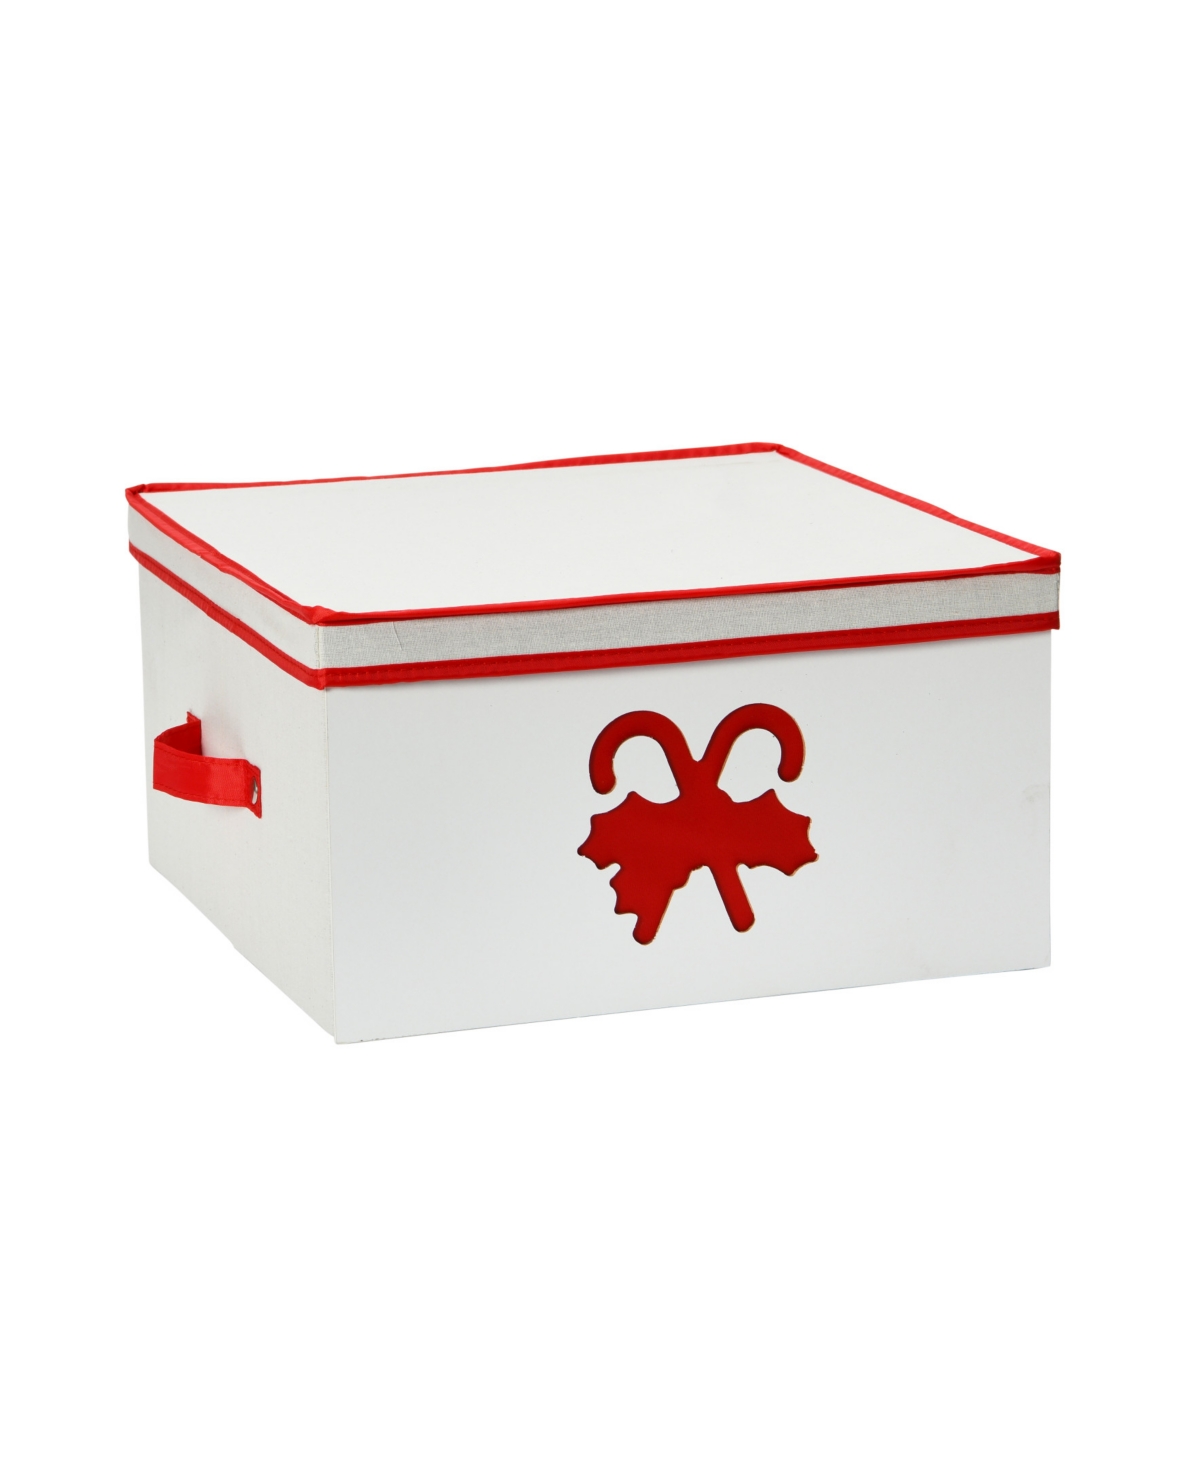 Household Essentials Holiday Box, Large Red Candy Cane In Cream